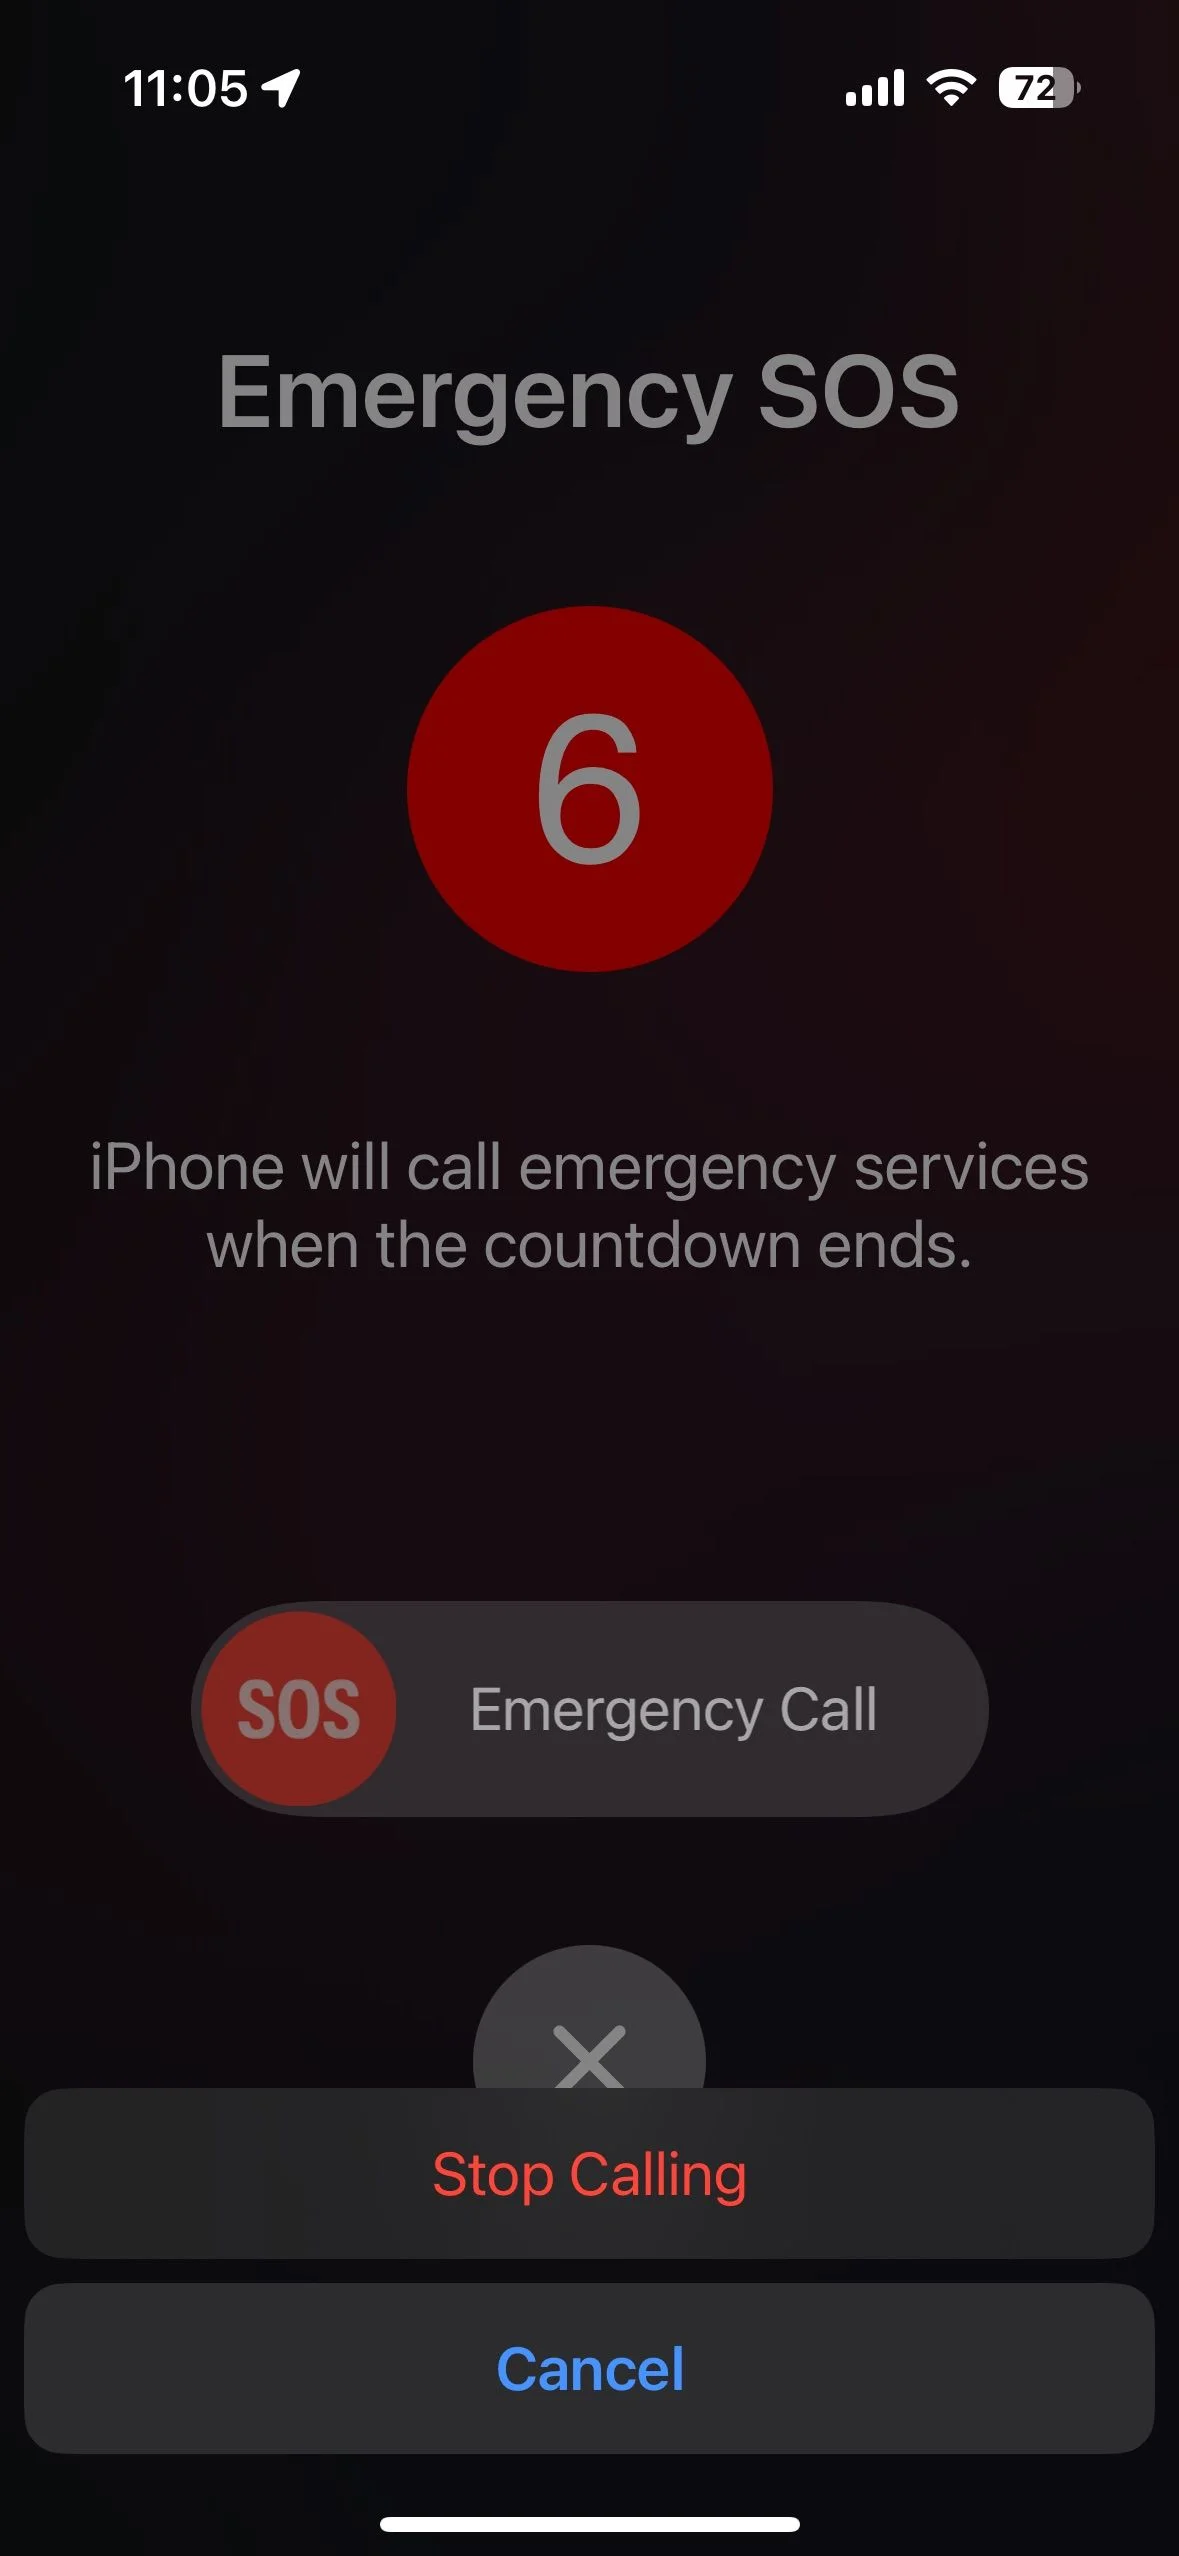 How to Safely Manage Your iPhone's SOS Feature to Avoid Accidental 911 Calls